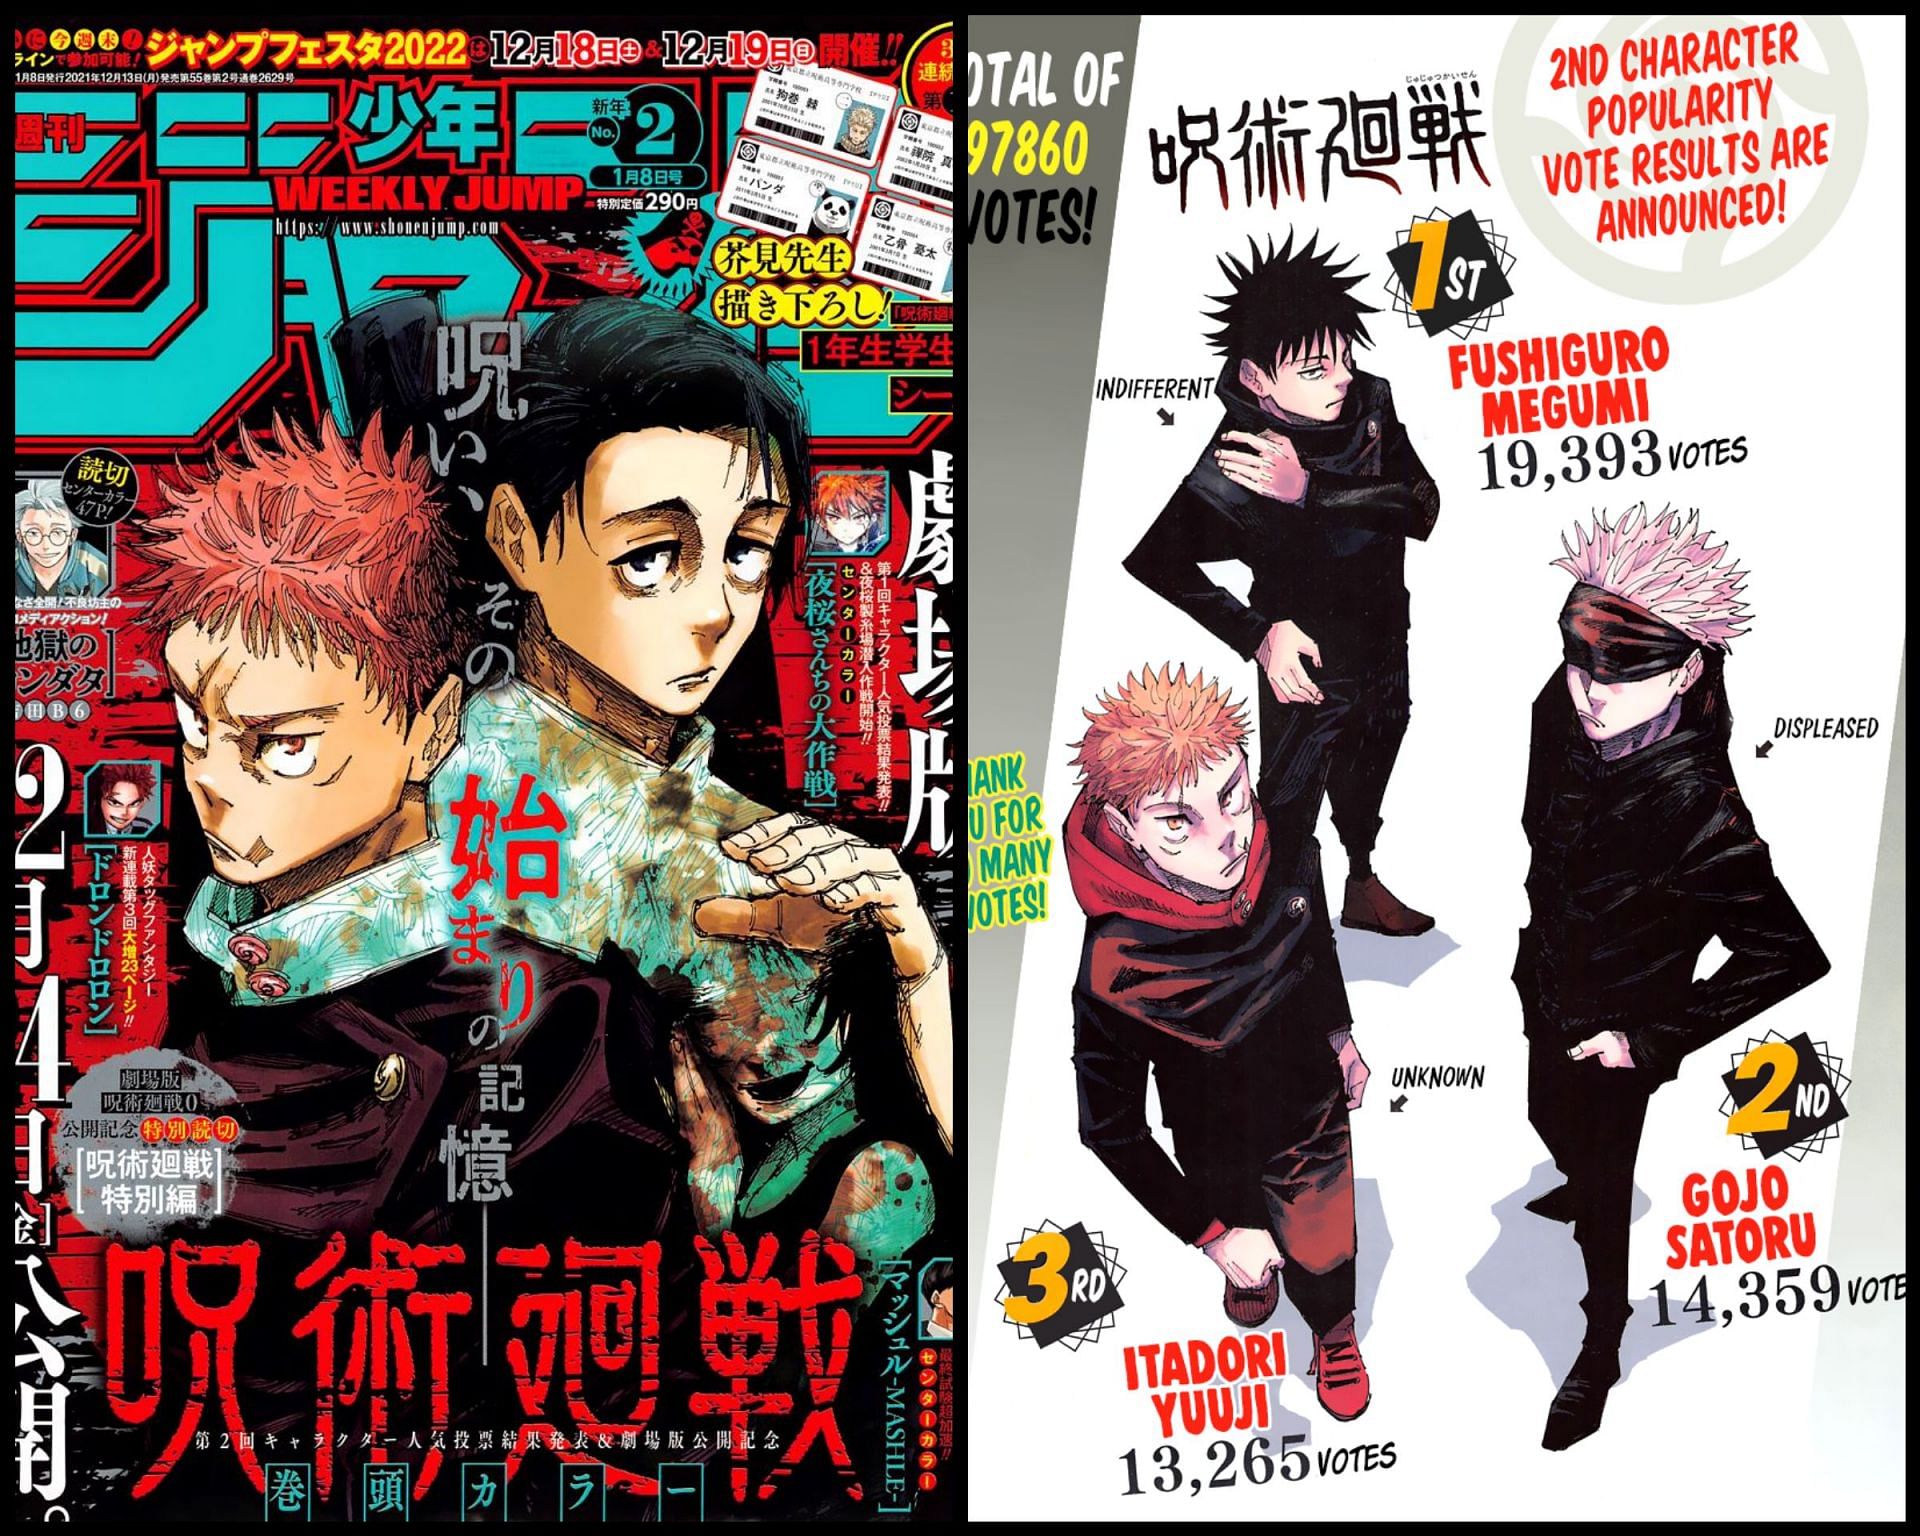 Jujutsu Kaisen chapter 169 leaked spoilers Color page, break announced